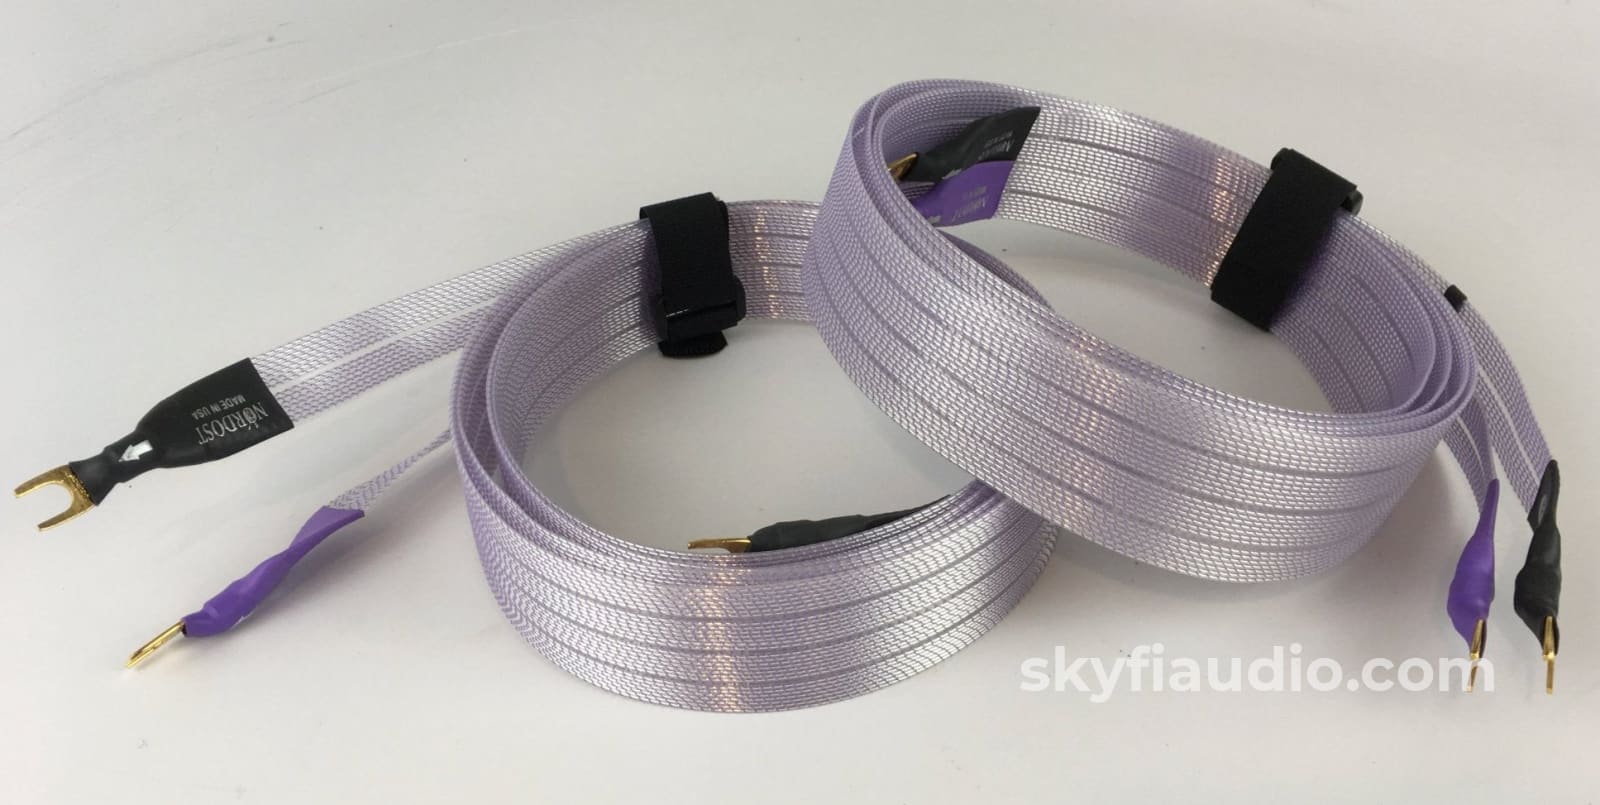 Nordost Frey Speaker Cable - 2M Cables